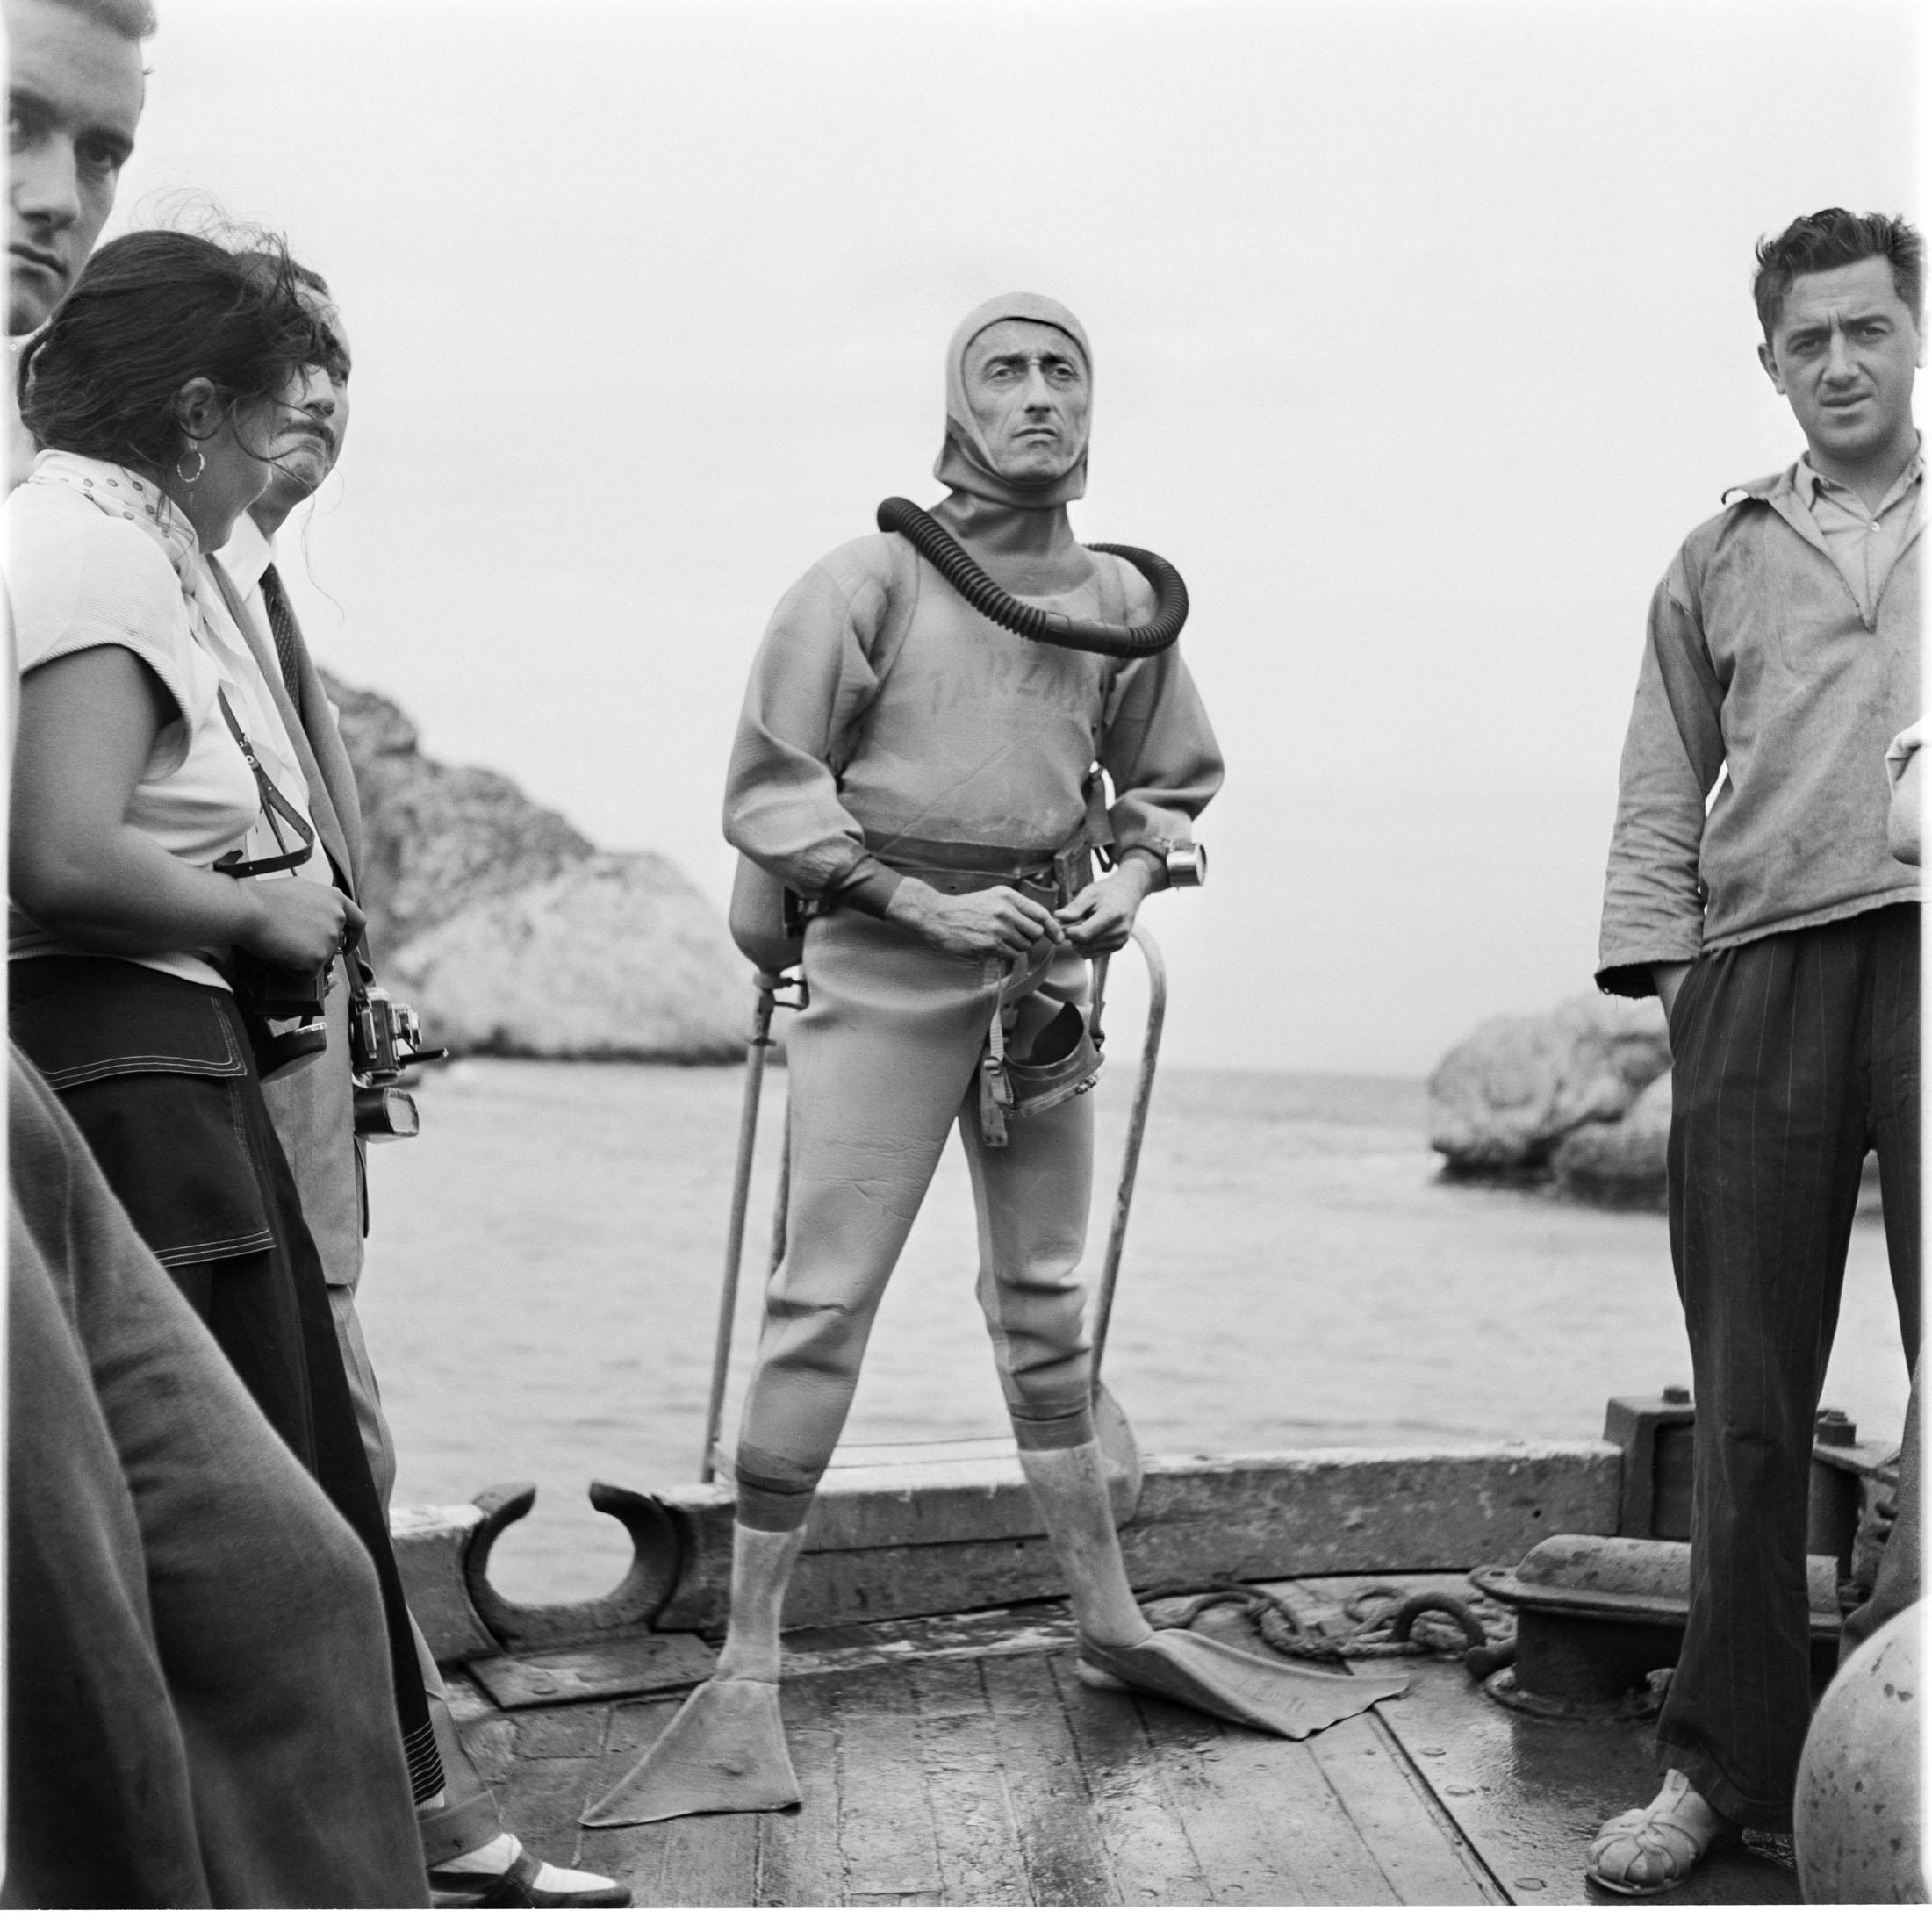 How did Cousteau Inspire You?